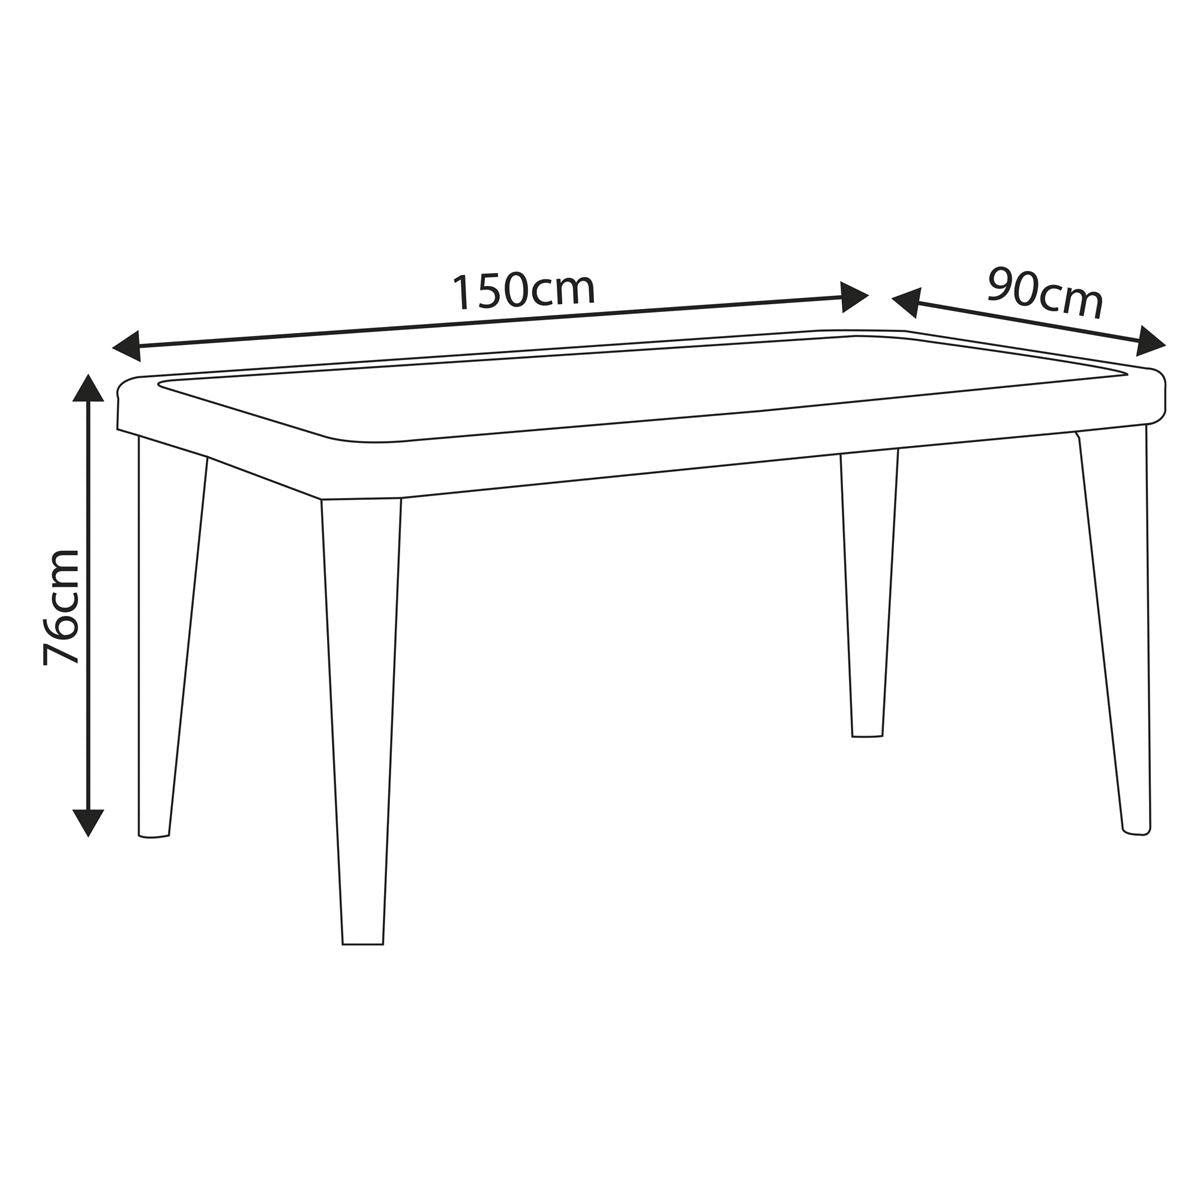 Dellonda Outdoor Dining Table Weather Resistant Body Glass Table 90x150cm